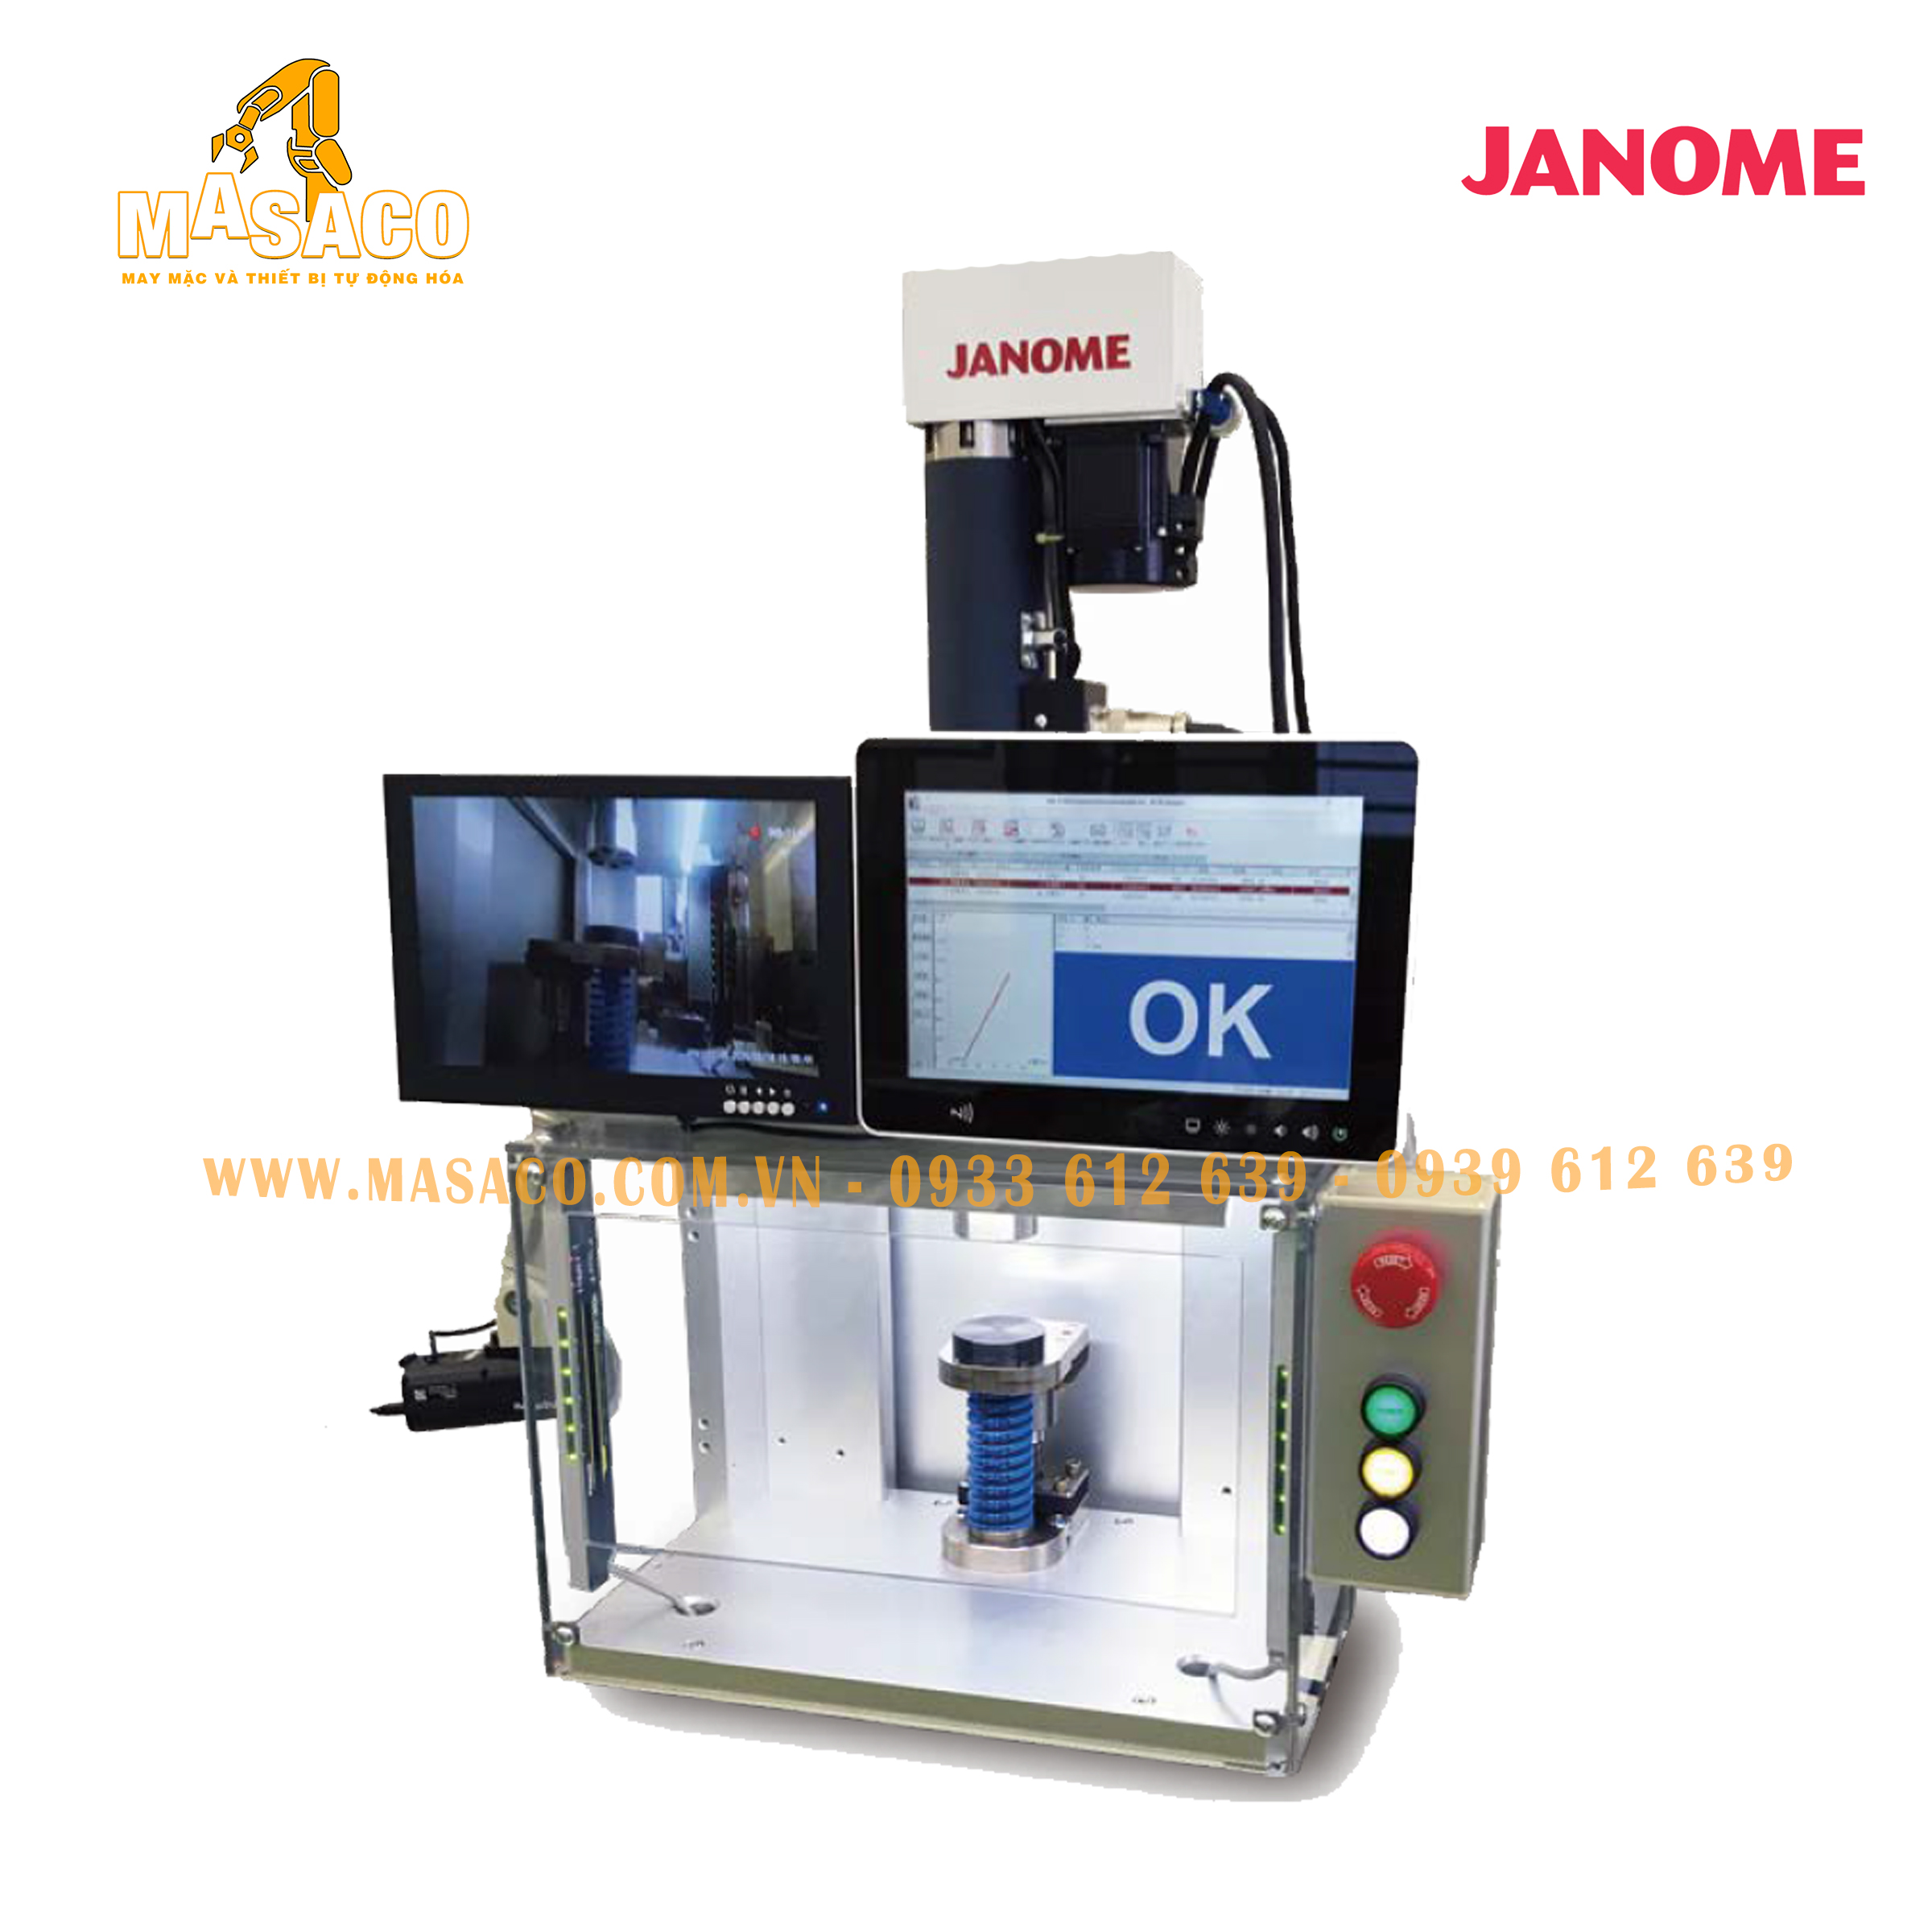 touch-panel-interface-for-janome-servo-press